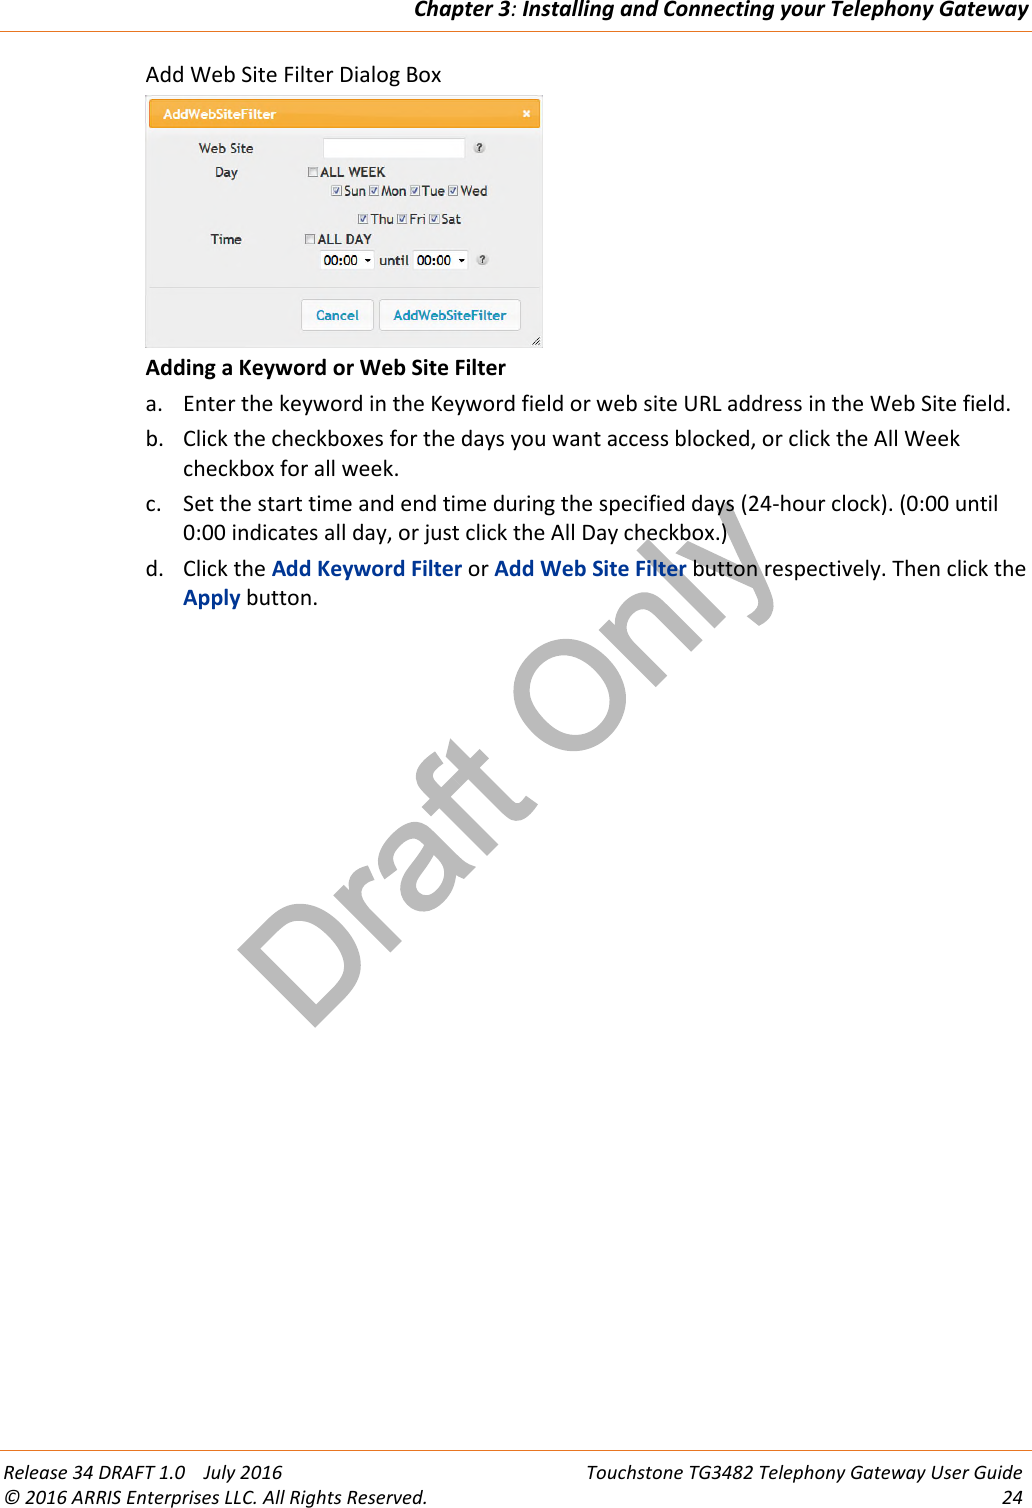 Draft OnlyChapter 3:Installing and Connecting your Telephony GatewayRelease 34 DRAFT 1.0 July 2016 Touchstone TG3482 Telephony Gateway User Guide© 2016 ARRIS Enterprises LLC. All Rights Reserved. 24Add Web Site Filter Dialog BoxAdding a Keyword or Web Site Filtera. Enter the keyword in the Keyword field or web site URL address in the Web Site field.b. Click the checkboxes for the days you want access blocked, or click the All Weekcheckbox for all week.c. Set the start time and end time during the specified days (24-hour clock). (0:00 until0:00 indicates all day, or just click the All Day checkbox.)d. Click the Add Keyword Filter or Add Web Site Filter button respectively. Then click theApply button.